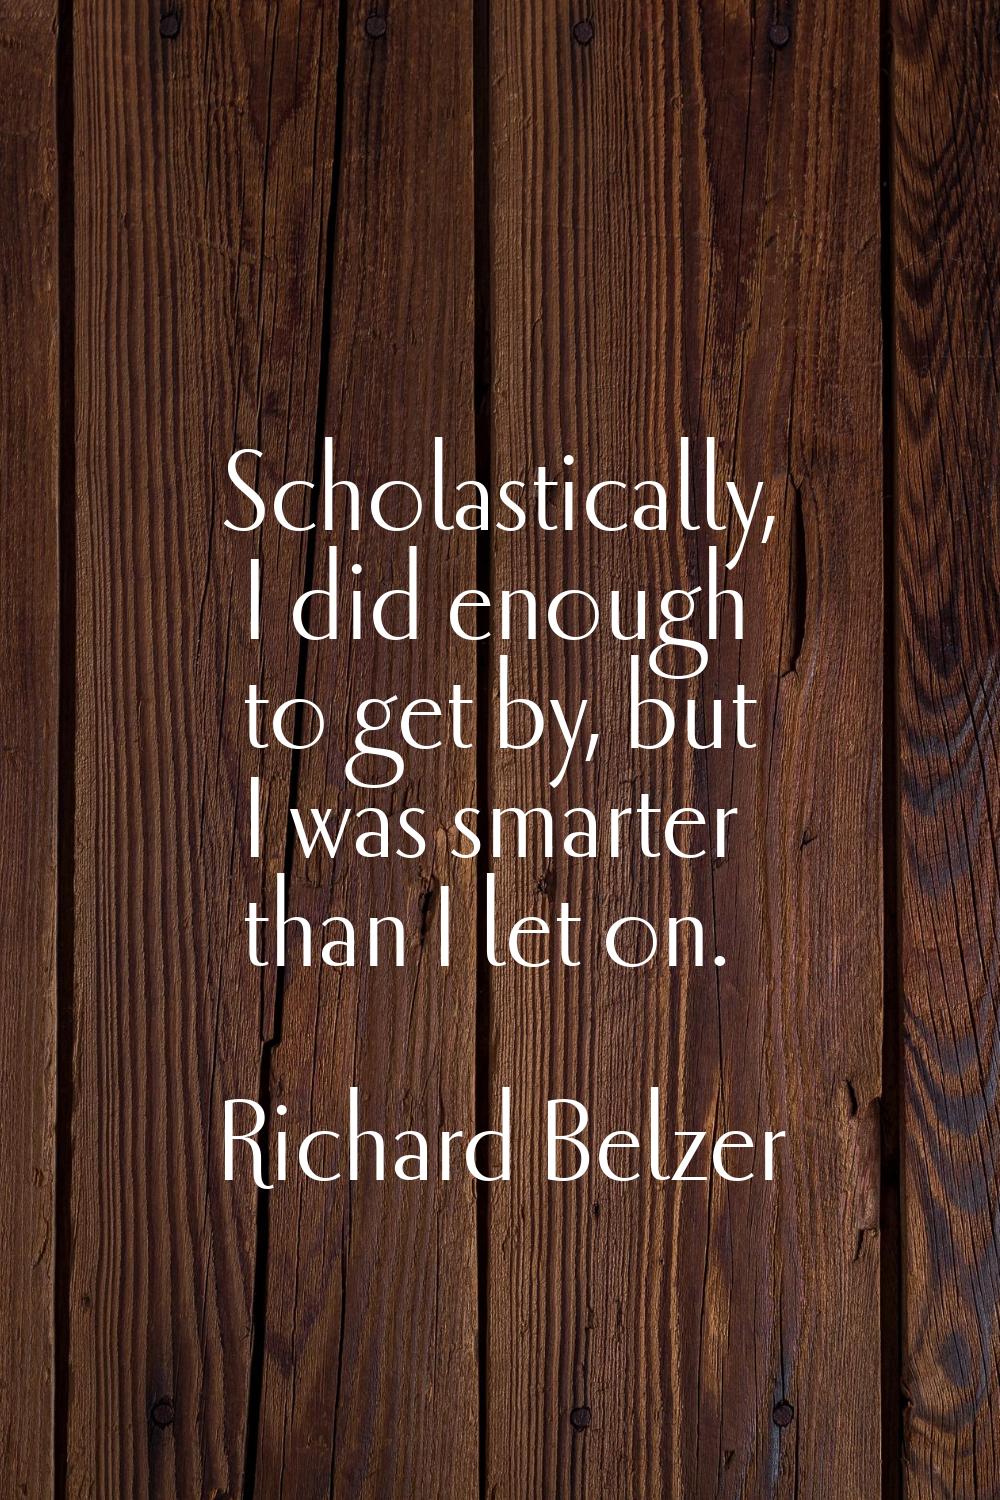 Scholastically, I did enough to get by, but I was smarter than I let on.